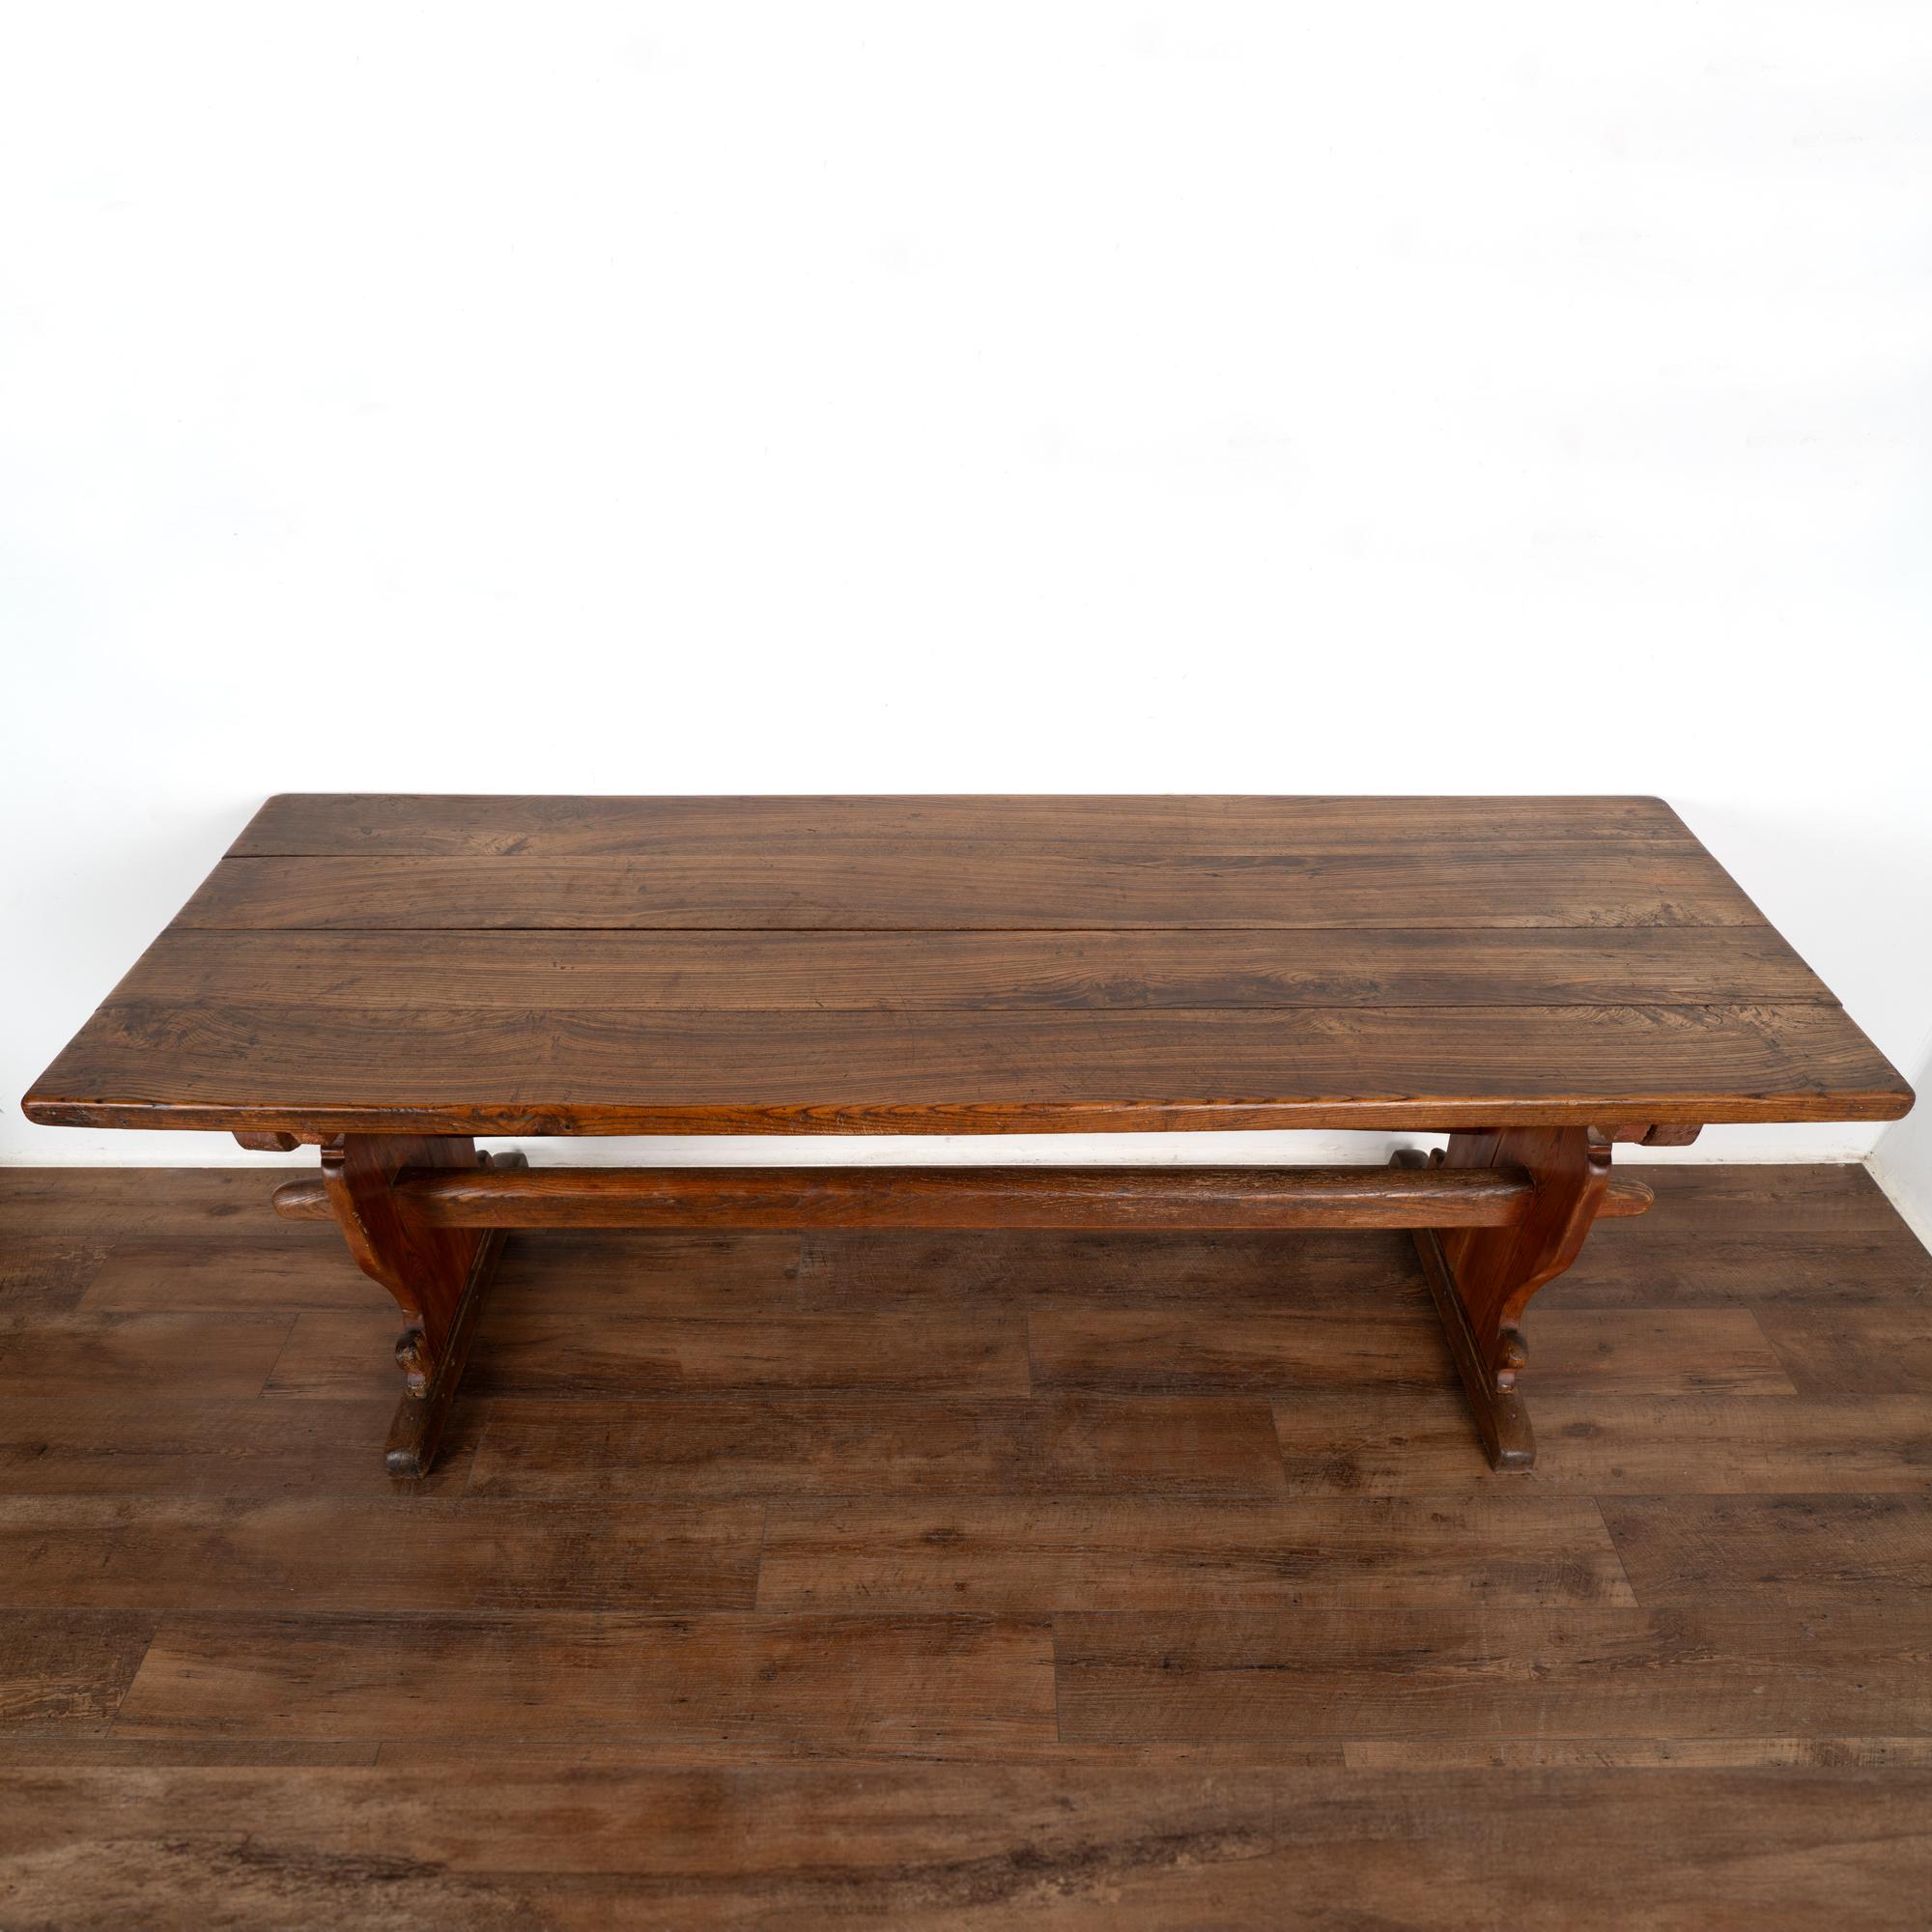 Danish Farm Dining Kitchen Table With Trestle Base, Denmark circa 1820-40 For Sale